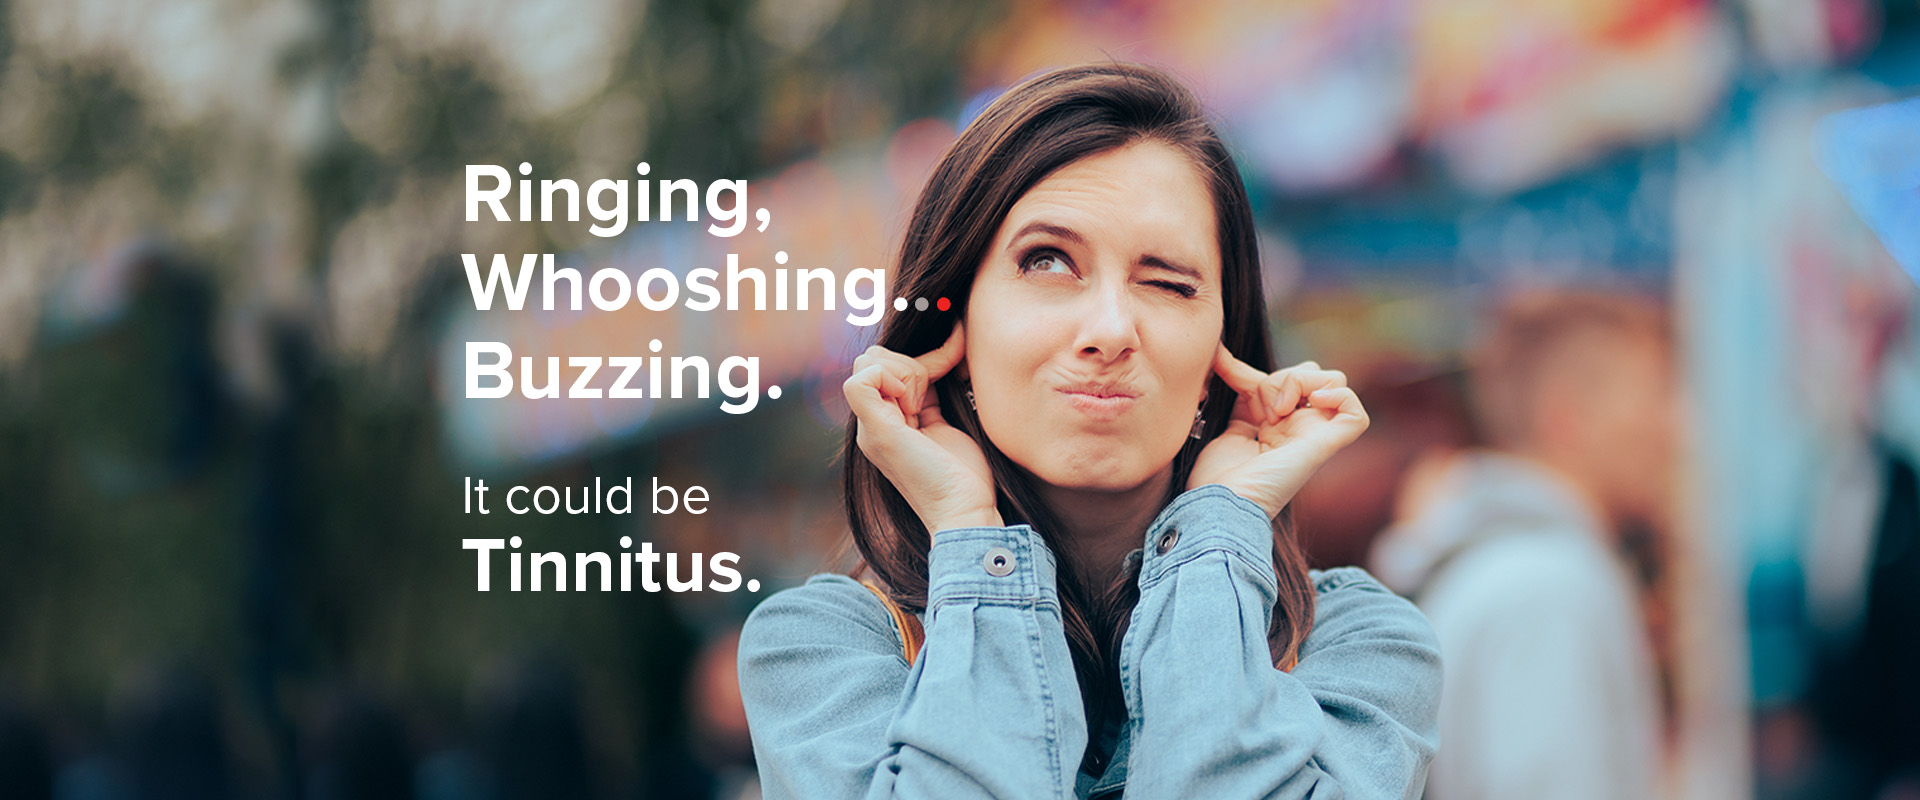 Ringing, Whooshing... Buzzing. It could be Tinnitus. -- Woman with fingers in her ears - making uncomfortable face.